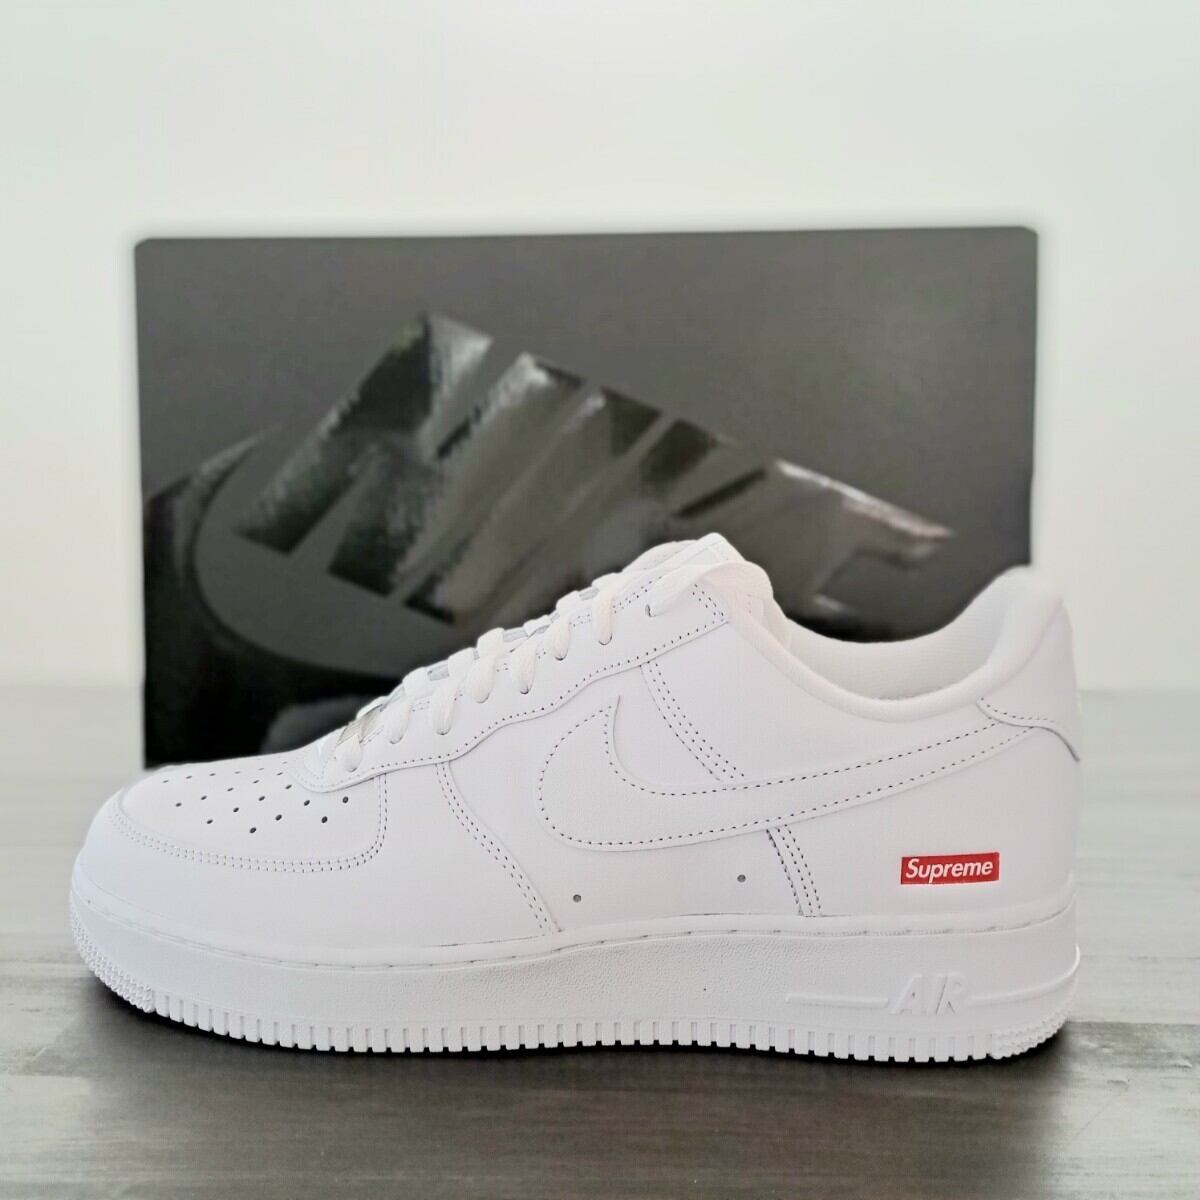 SUPREME × NIKE AIR FORCE 1 Low "White" 28.5cm | re.stoc